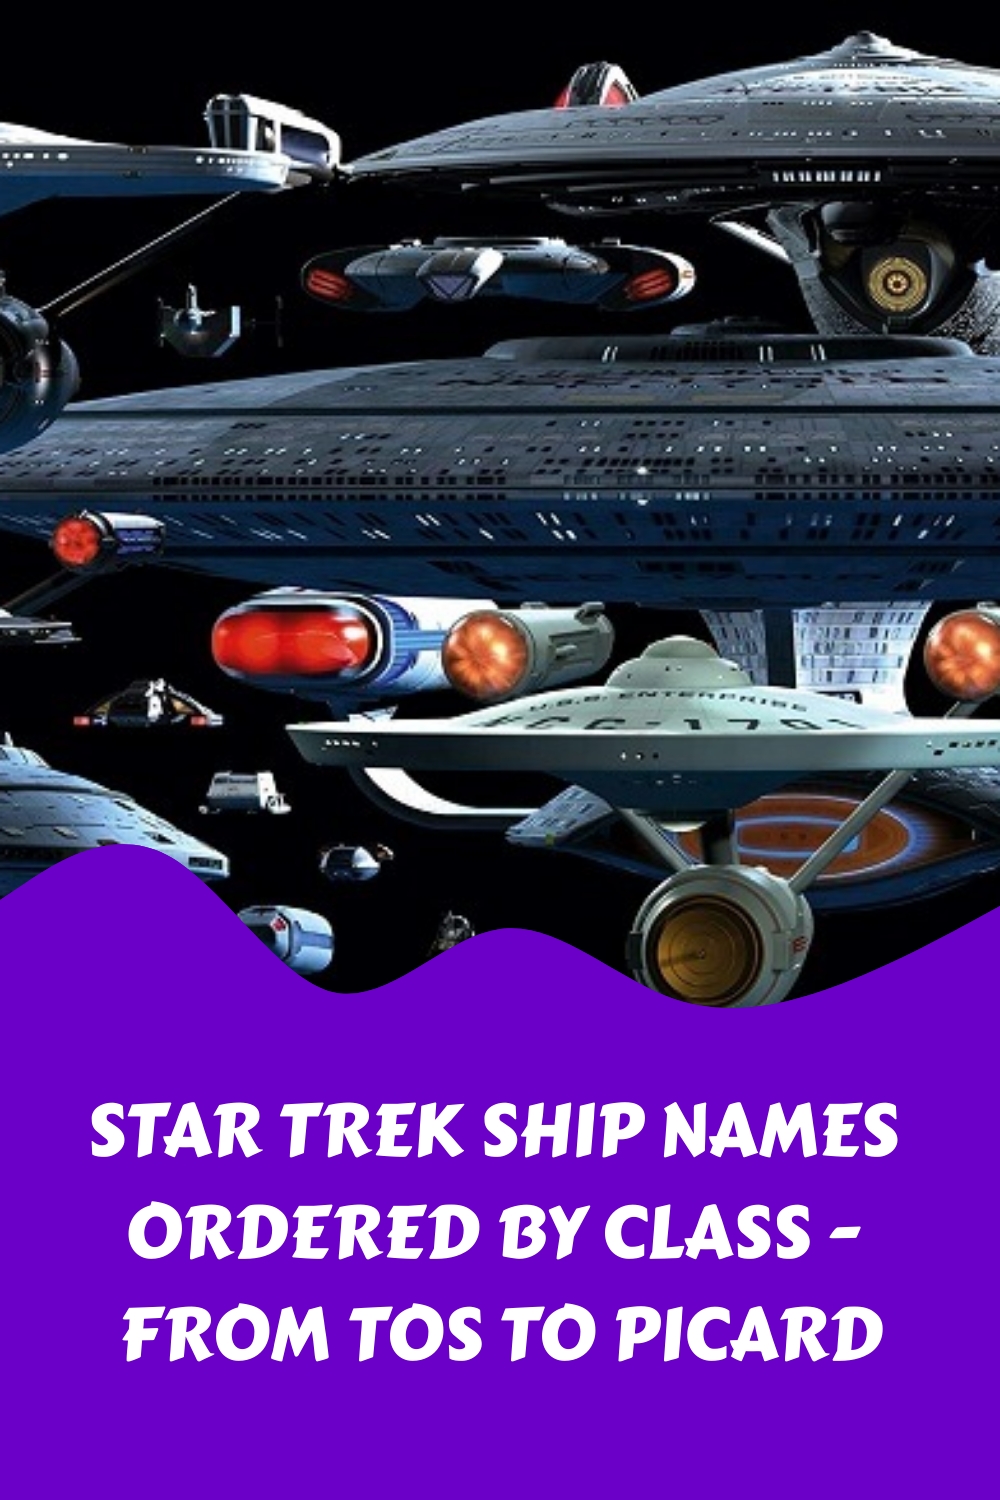 Star Trek Ship Names Ordered by Class From TOS to Picard generated pin 56653